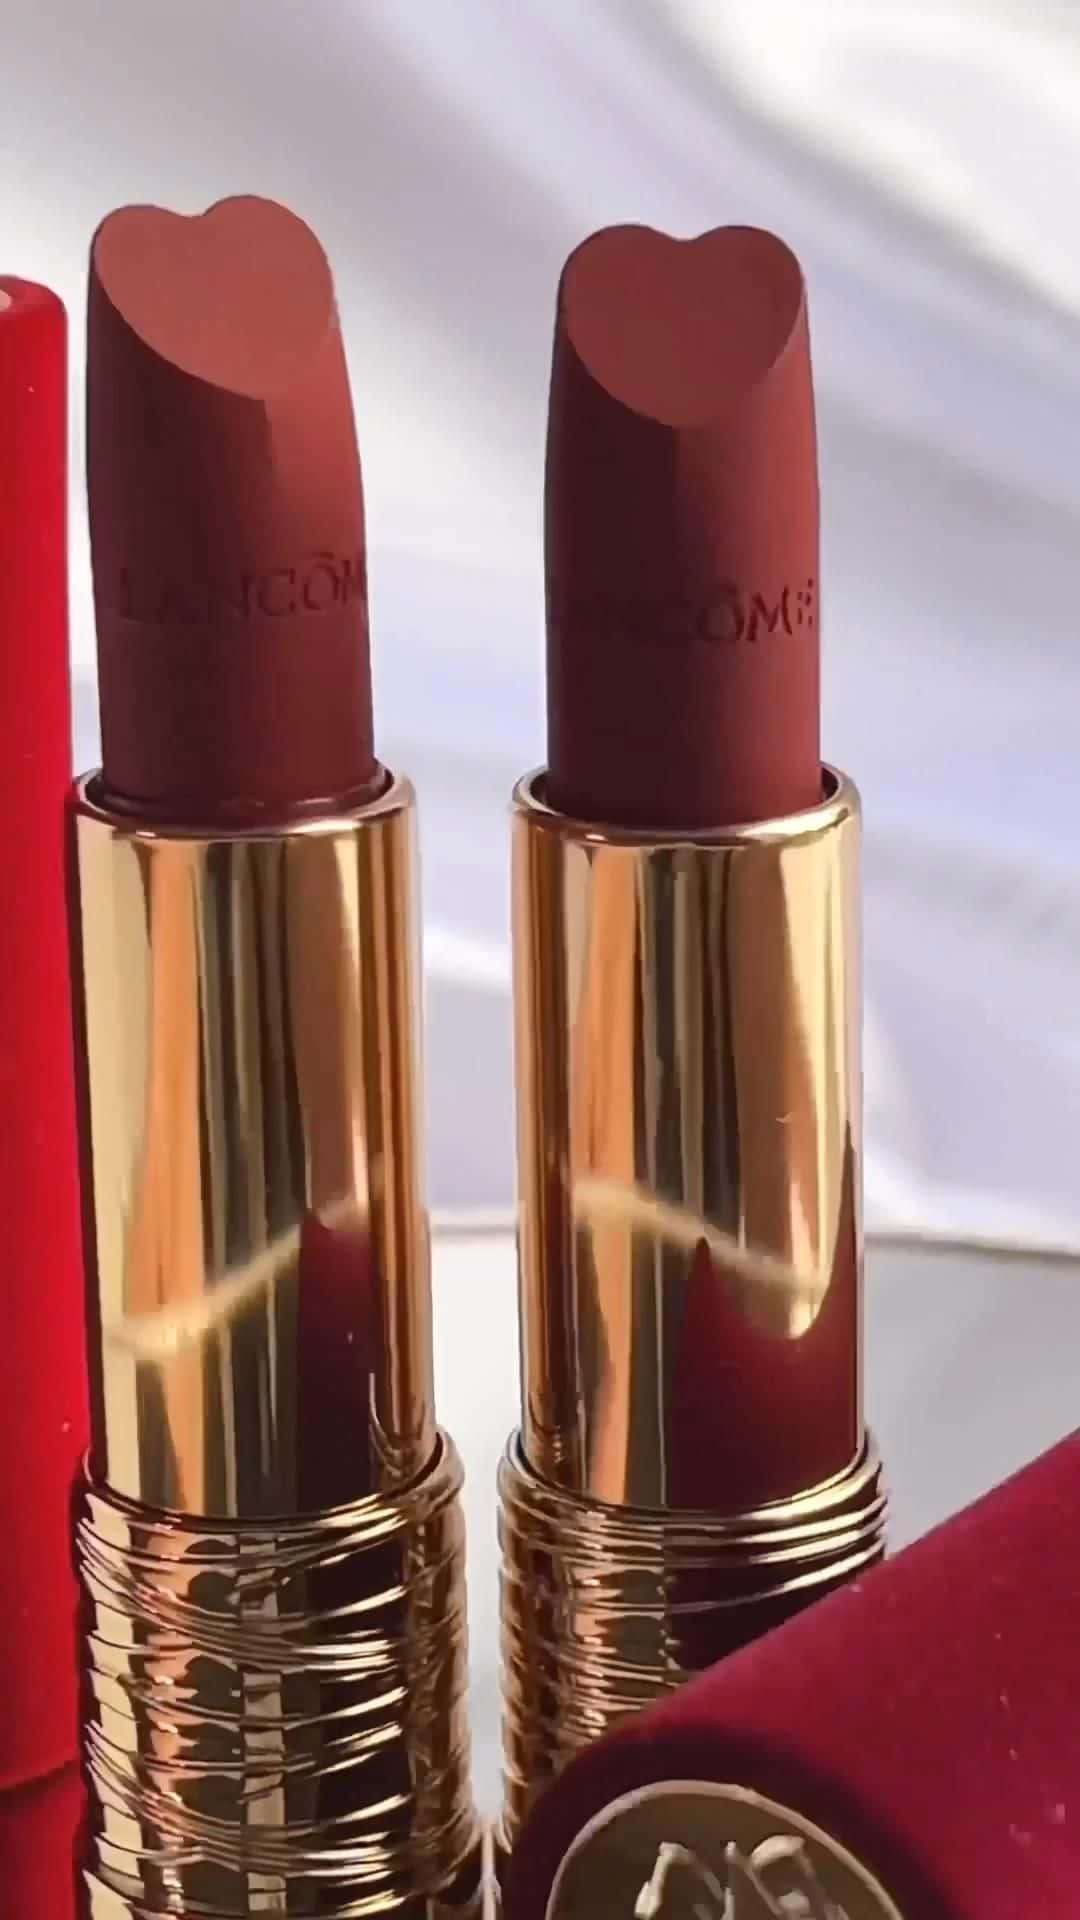 "Enhance your beauty with a unique look and gorgeous lip color"